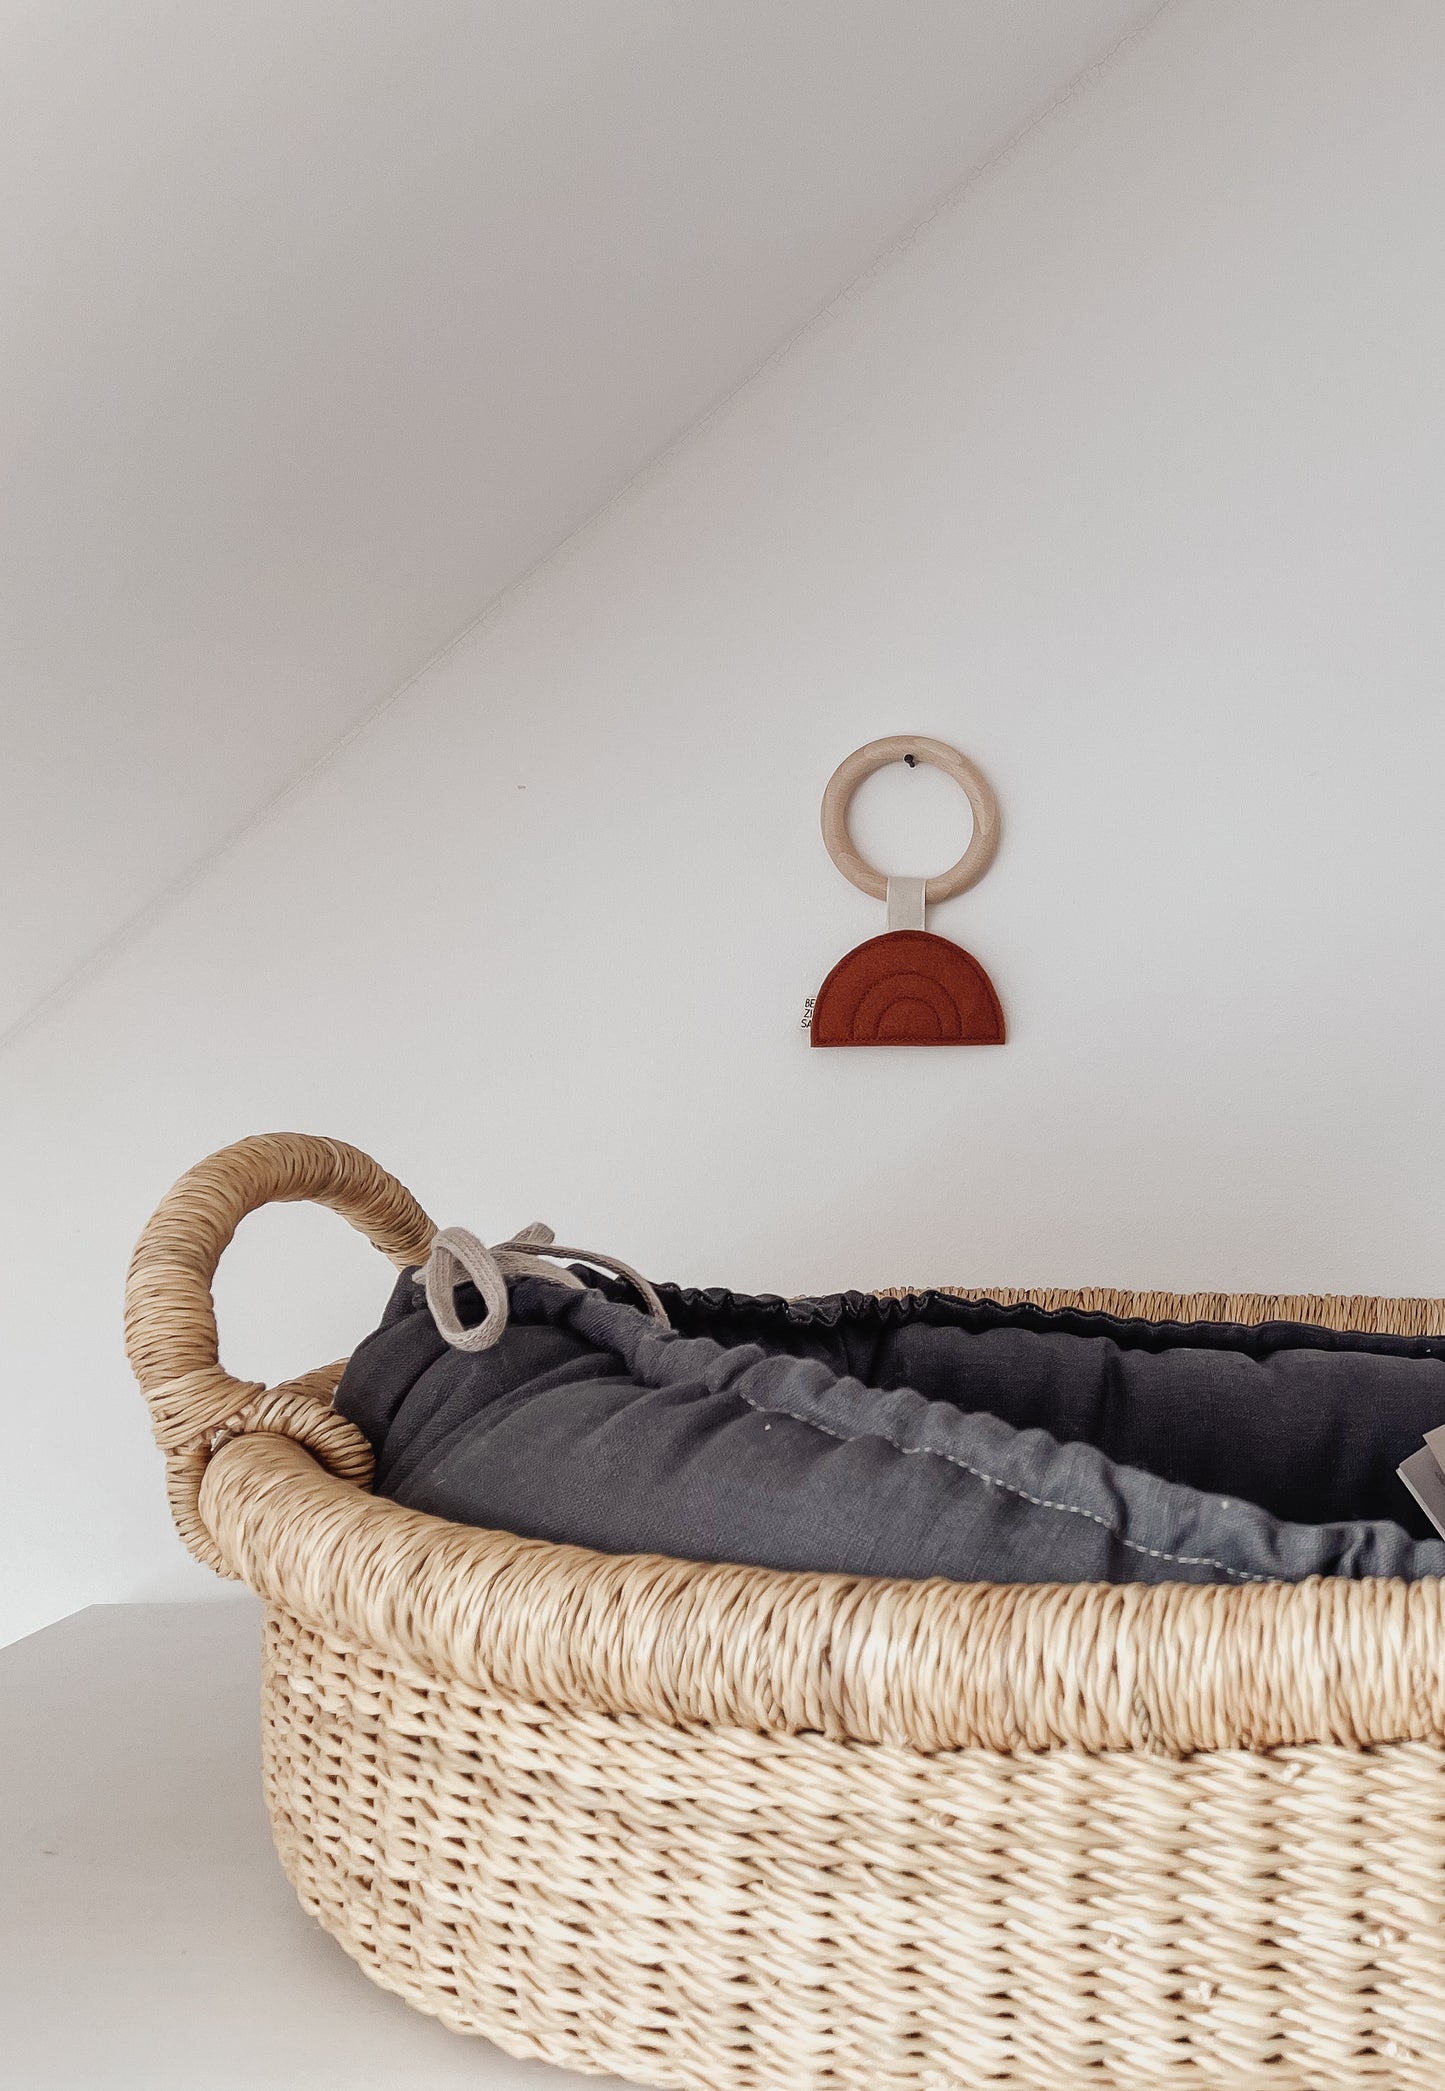 Bezisa Sunset teether in rust colour with wooden teething ring, hanging on a plain white wall. Baby changing basket is in the foreground.